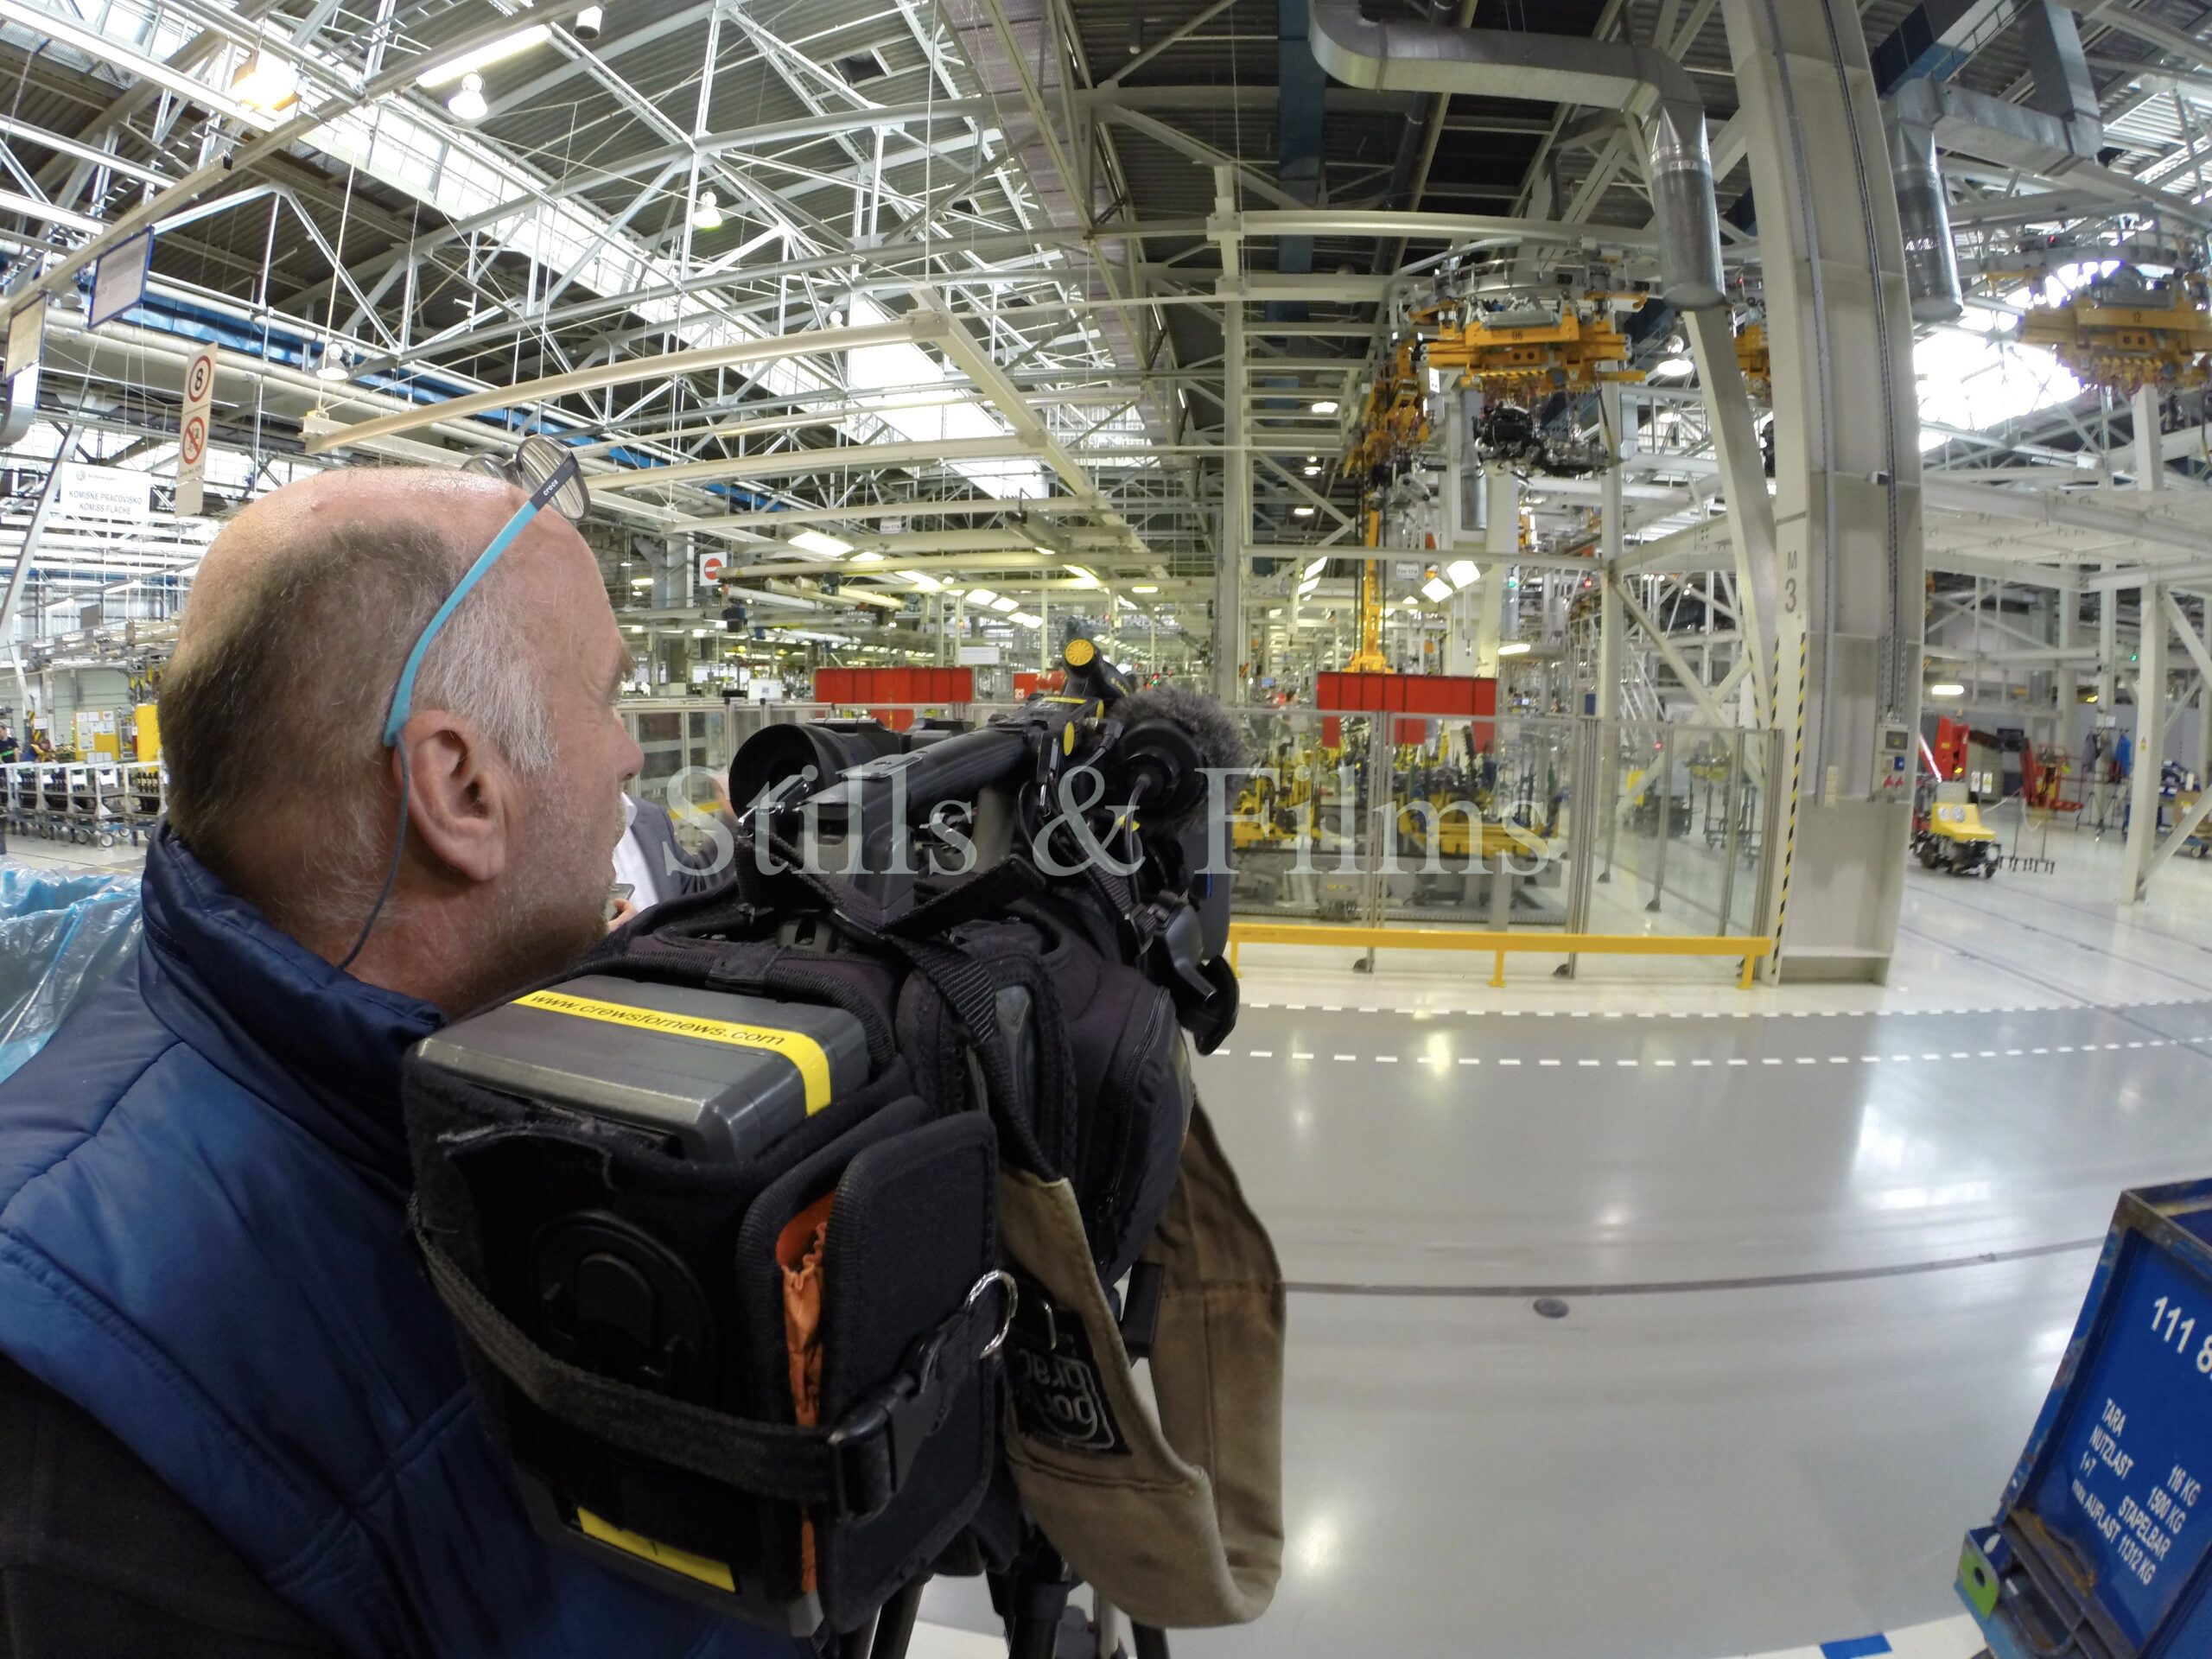 We are on a corporate video production shoot at the Volkswagen factory near Bratislava, Slovakia